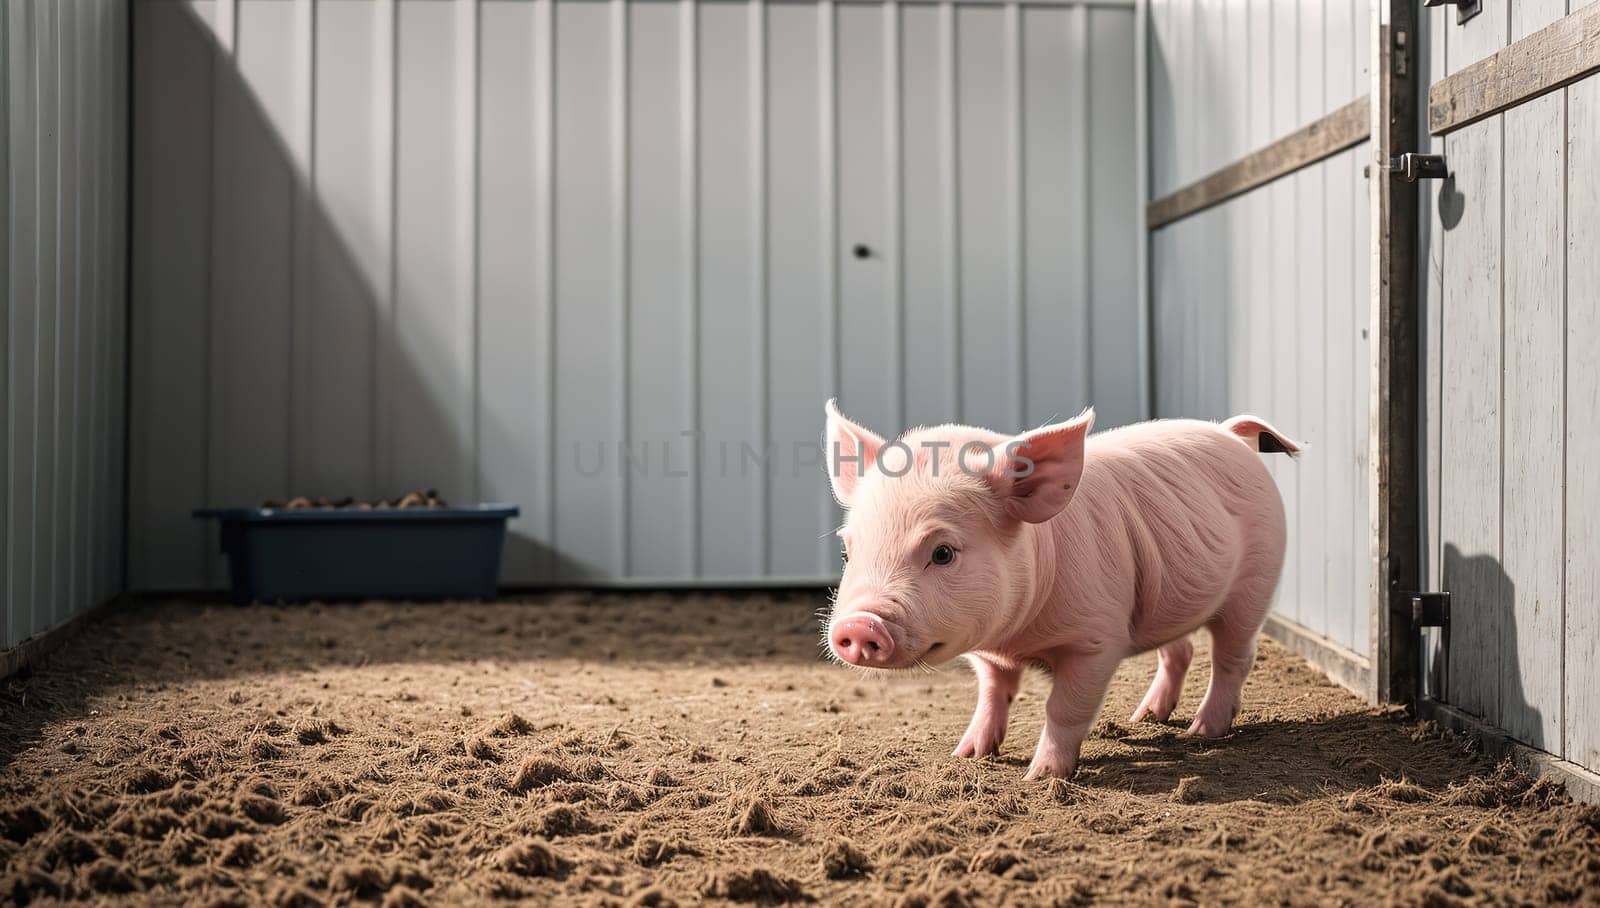 A small pig standing in a barn, looking up at the camera. by creart